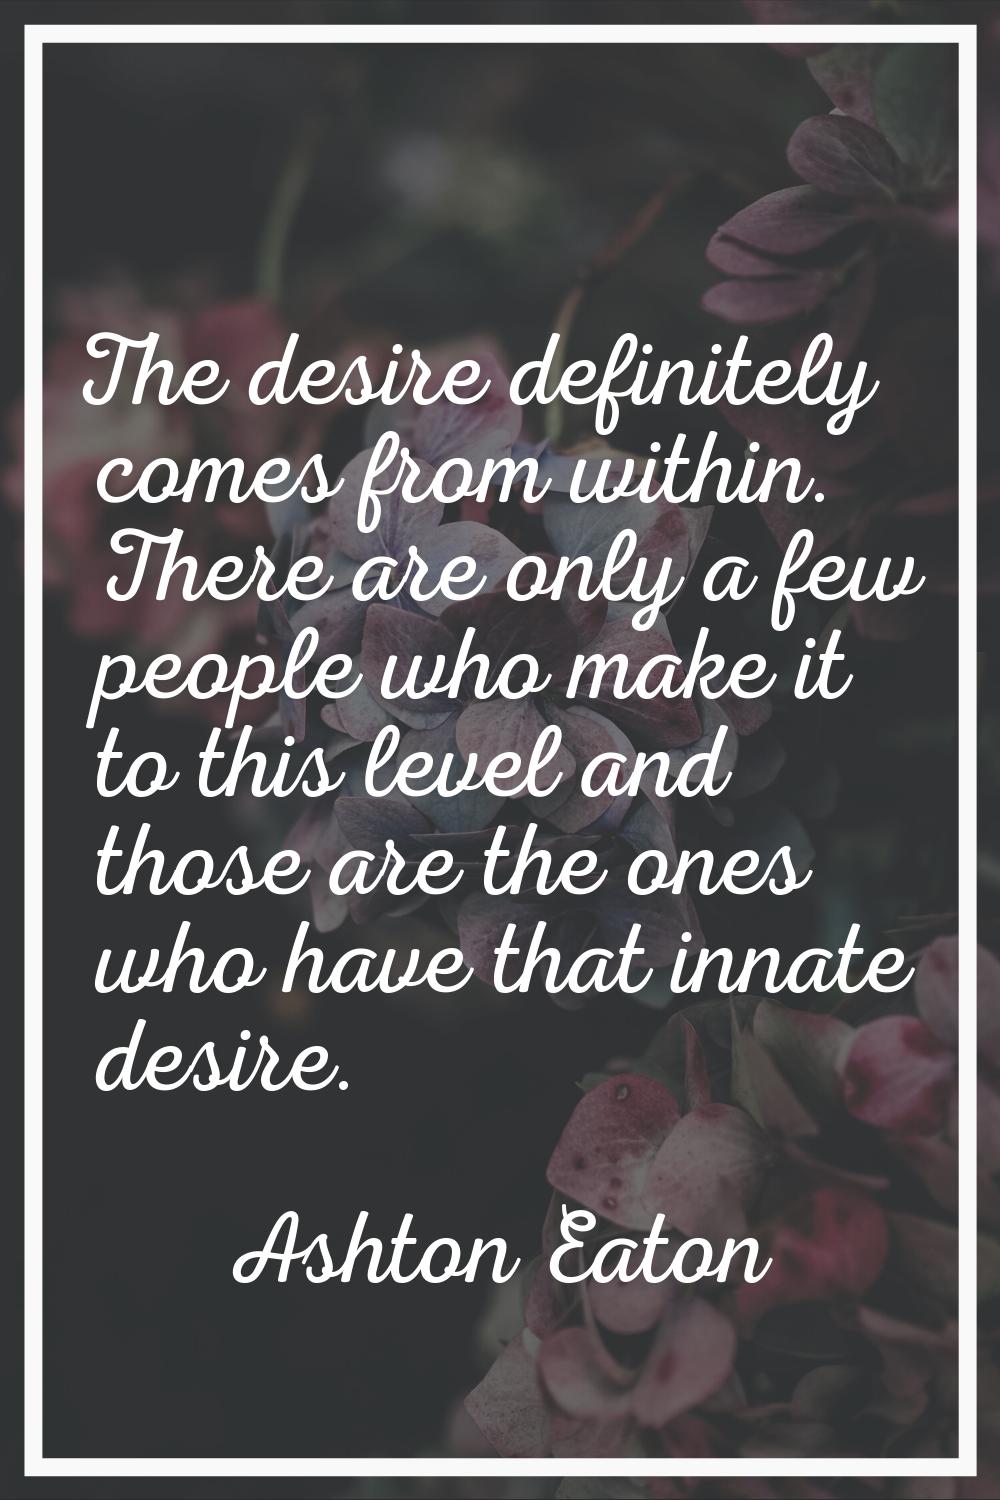 The desire definitely comes from within. There are only a few people who make it to this level and 